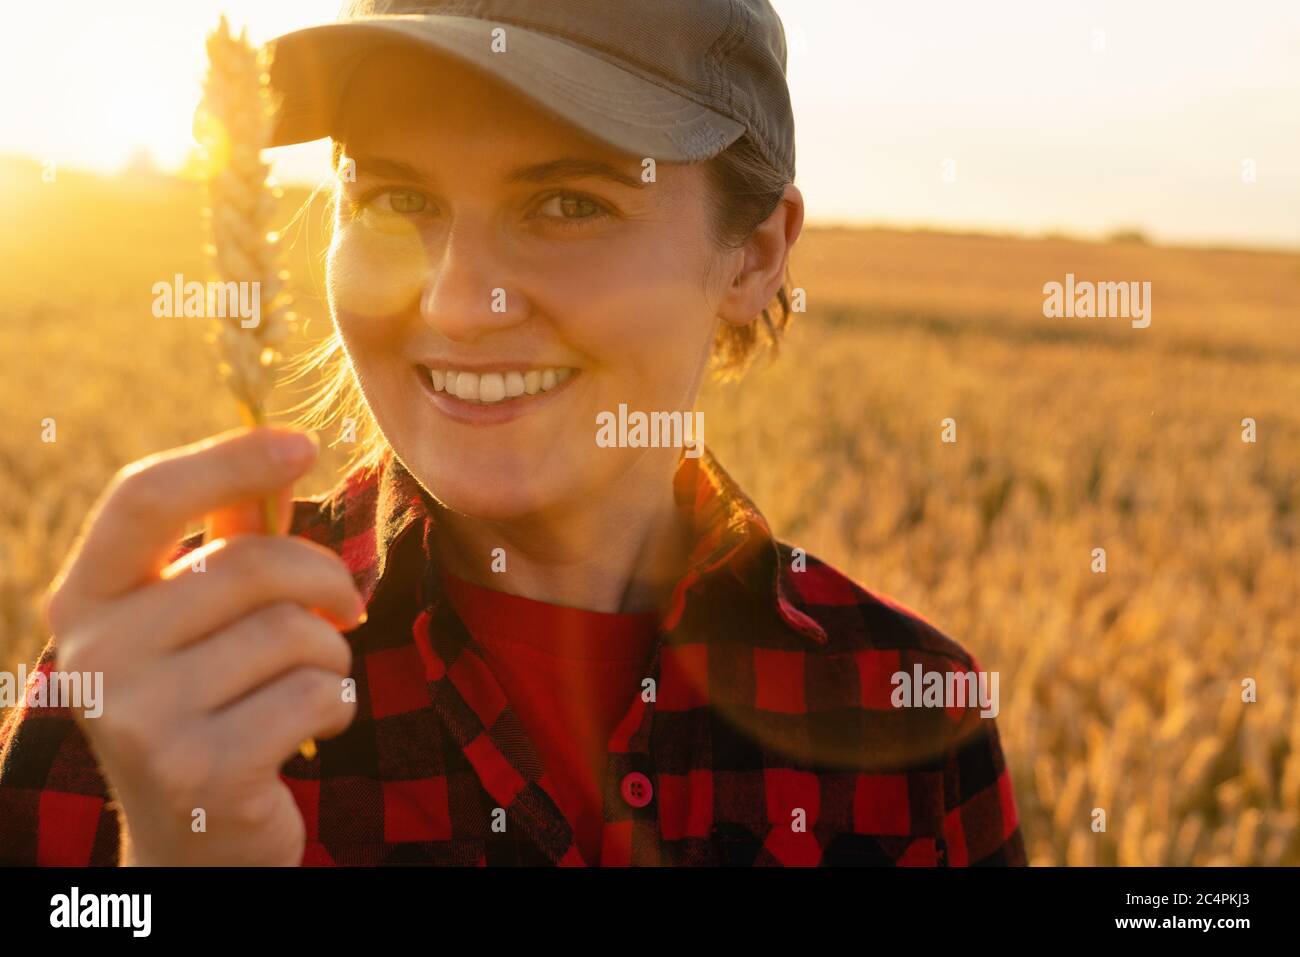 A woman farmer stands in a agricultural field at sunset and looks at an ear of wheat. Stock Photo